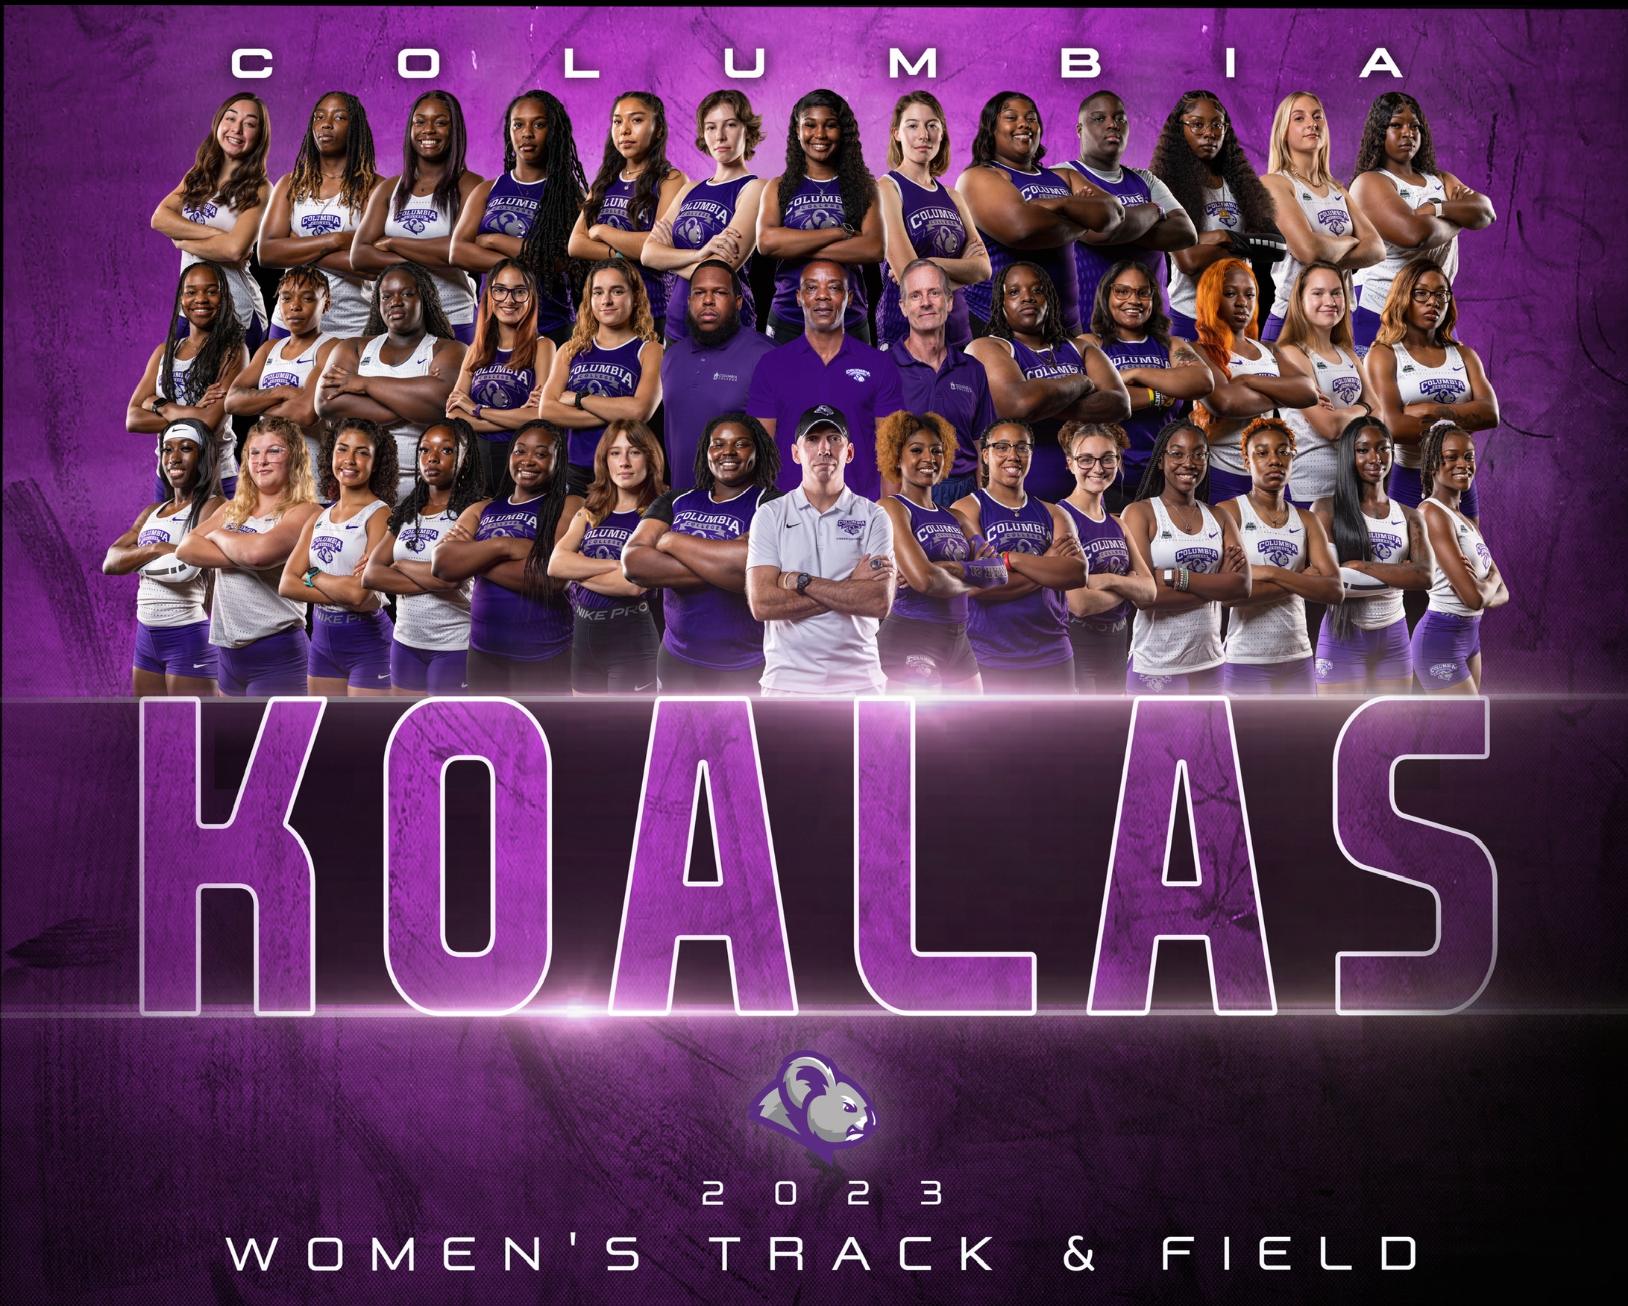 Race Walkers Led Women's Track at High Point